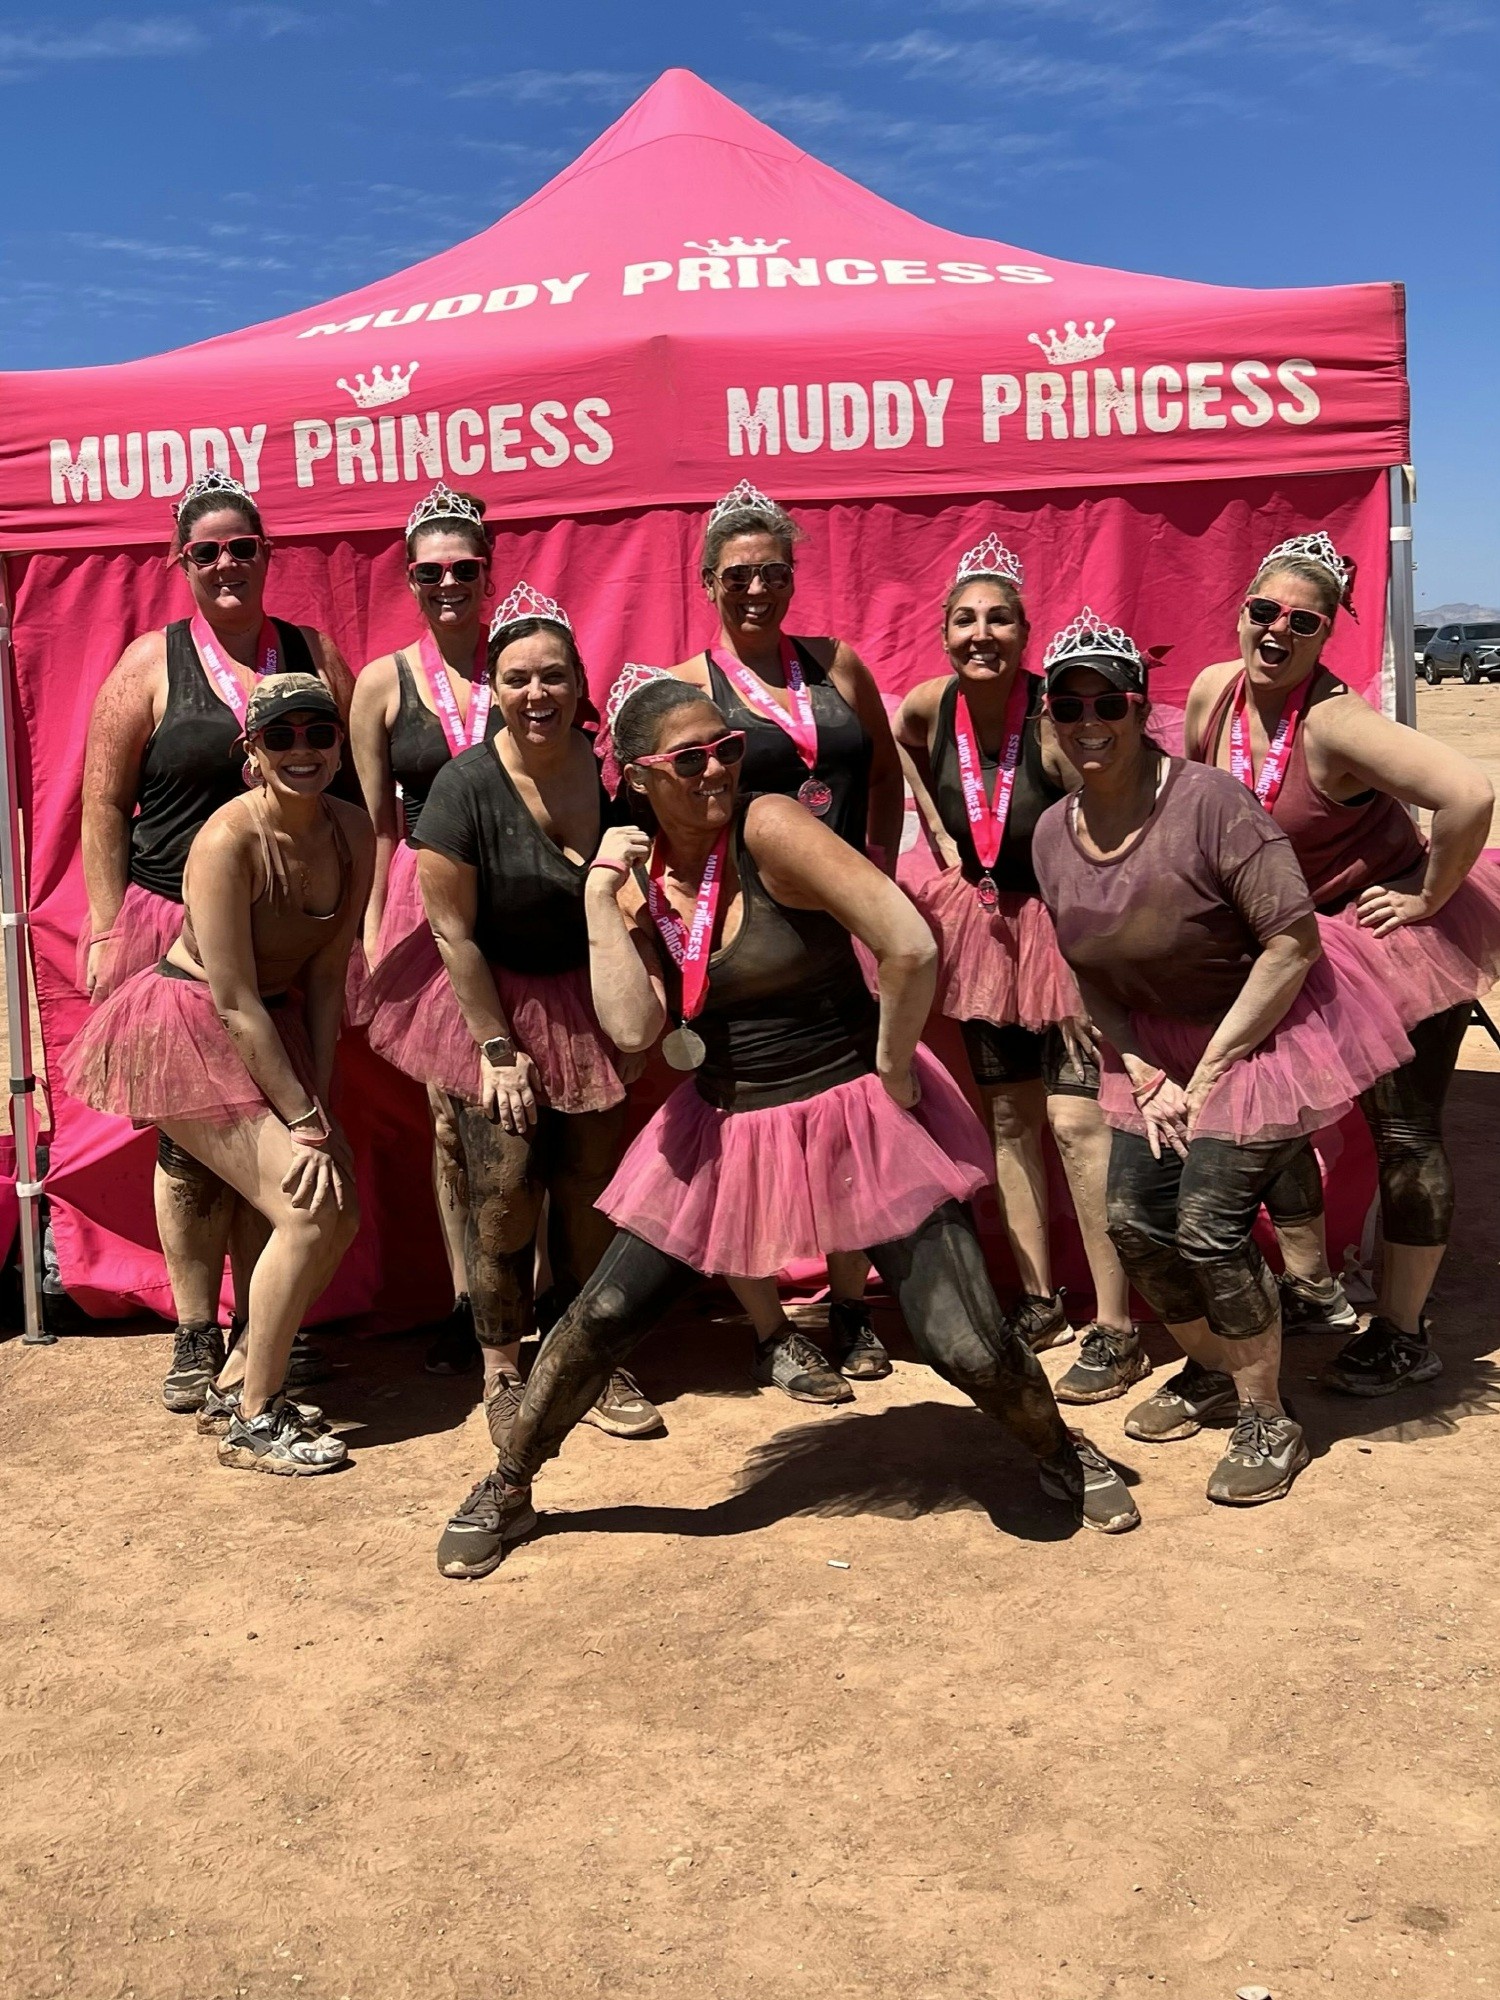 These wildly awesome BH'ers join together to raise money for breast cancer awareness during a Muddy Princess event.